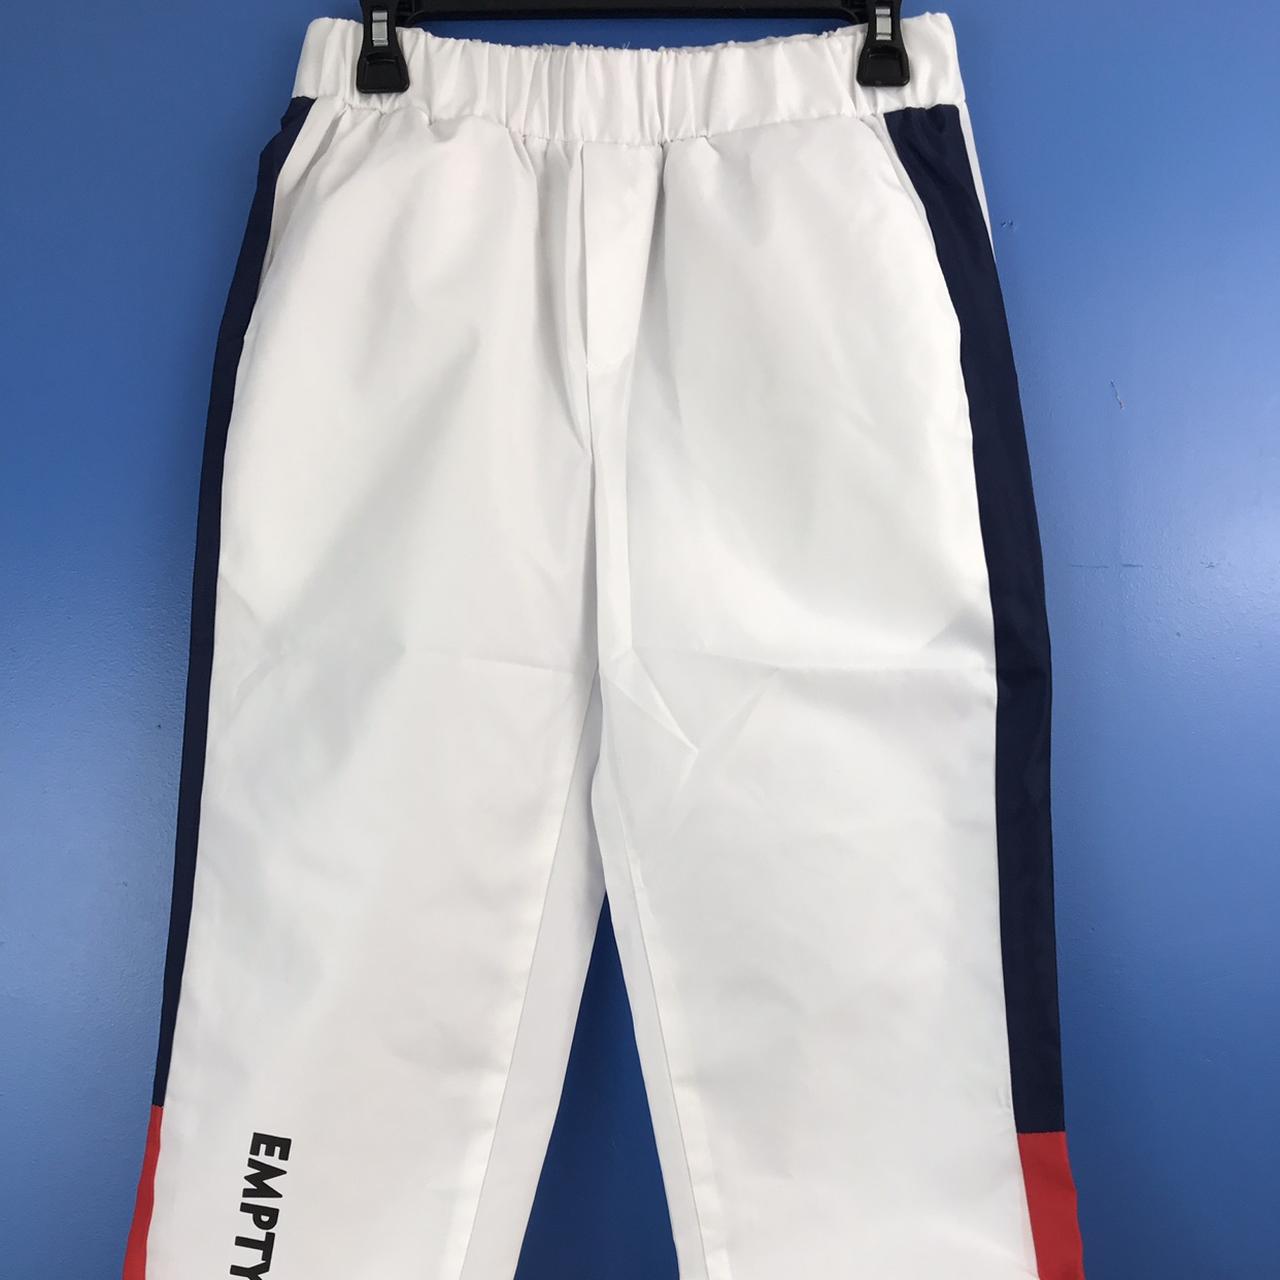 SHEIN Men's White and Navy Joggers-tracksuits | Depop